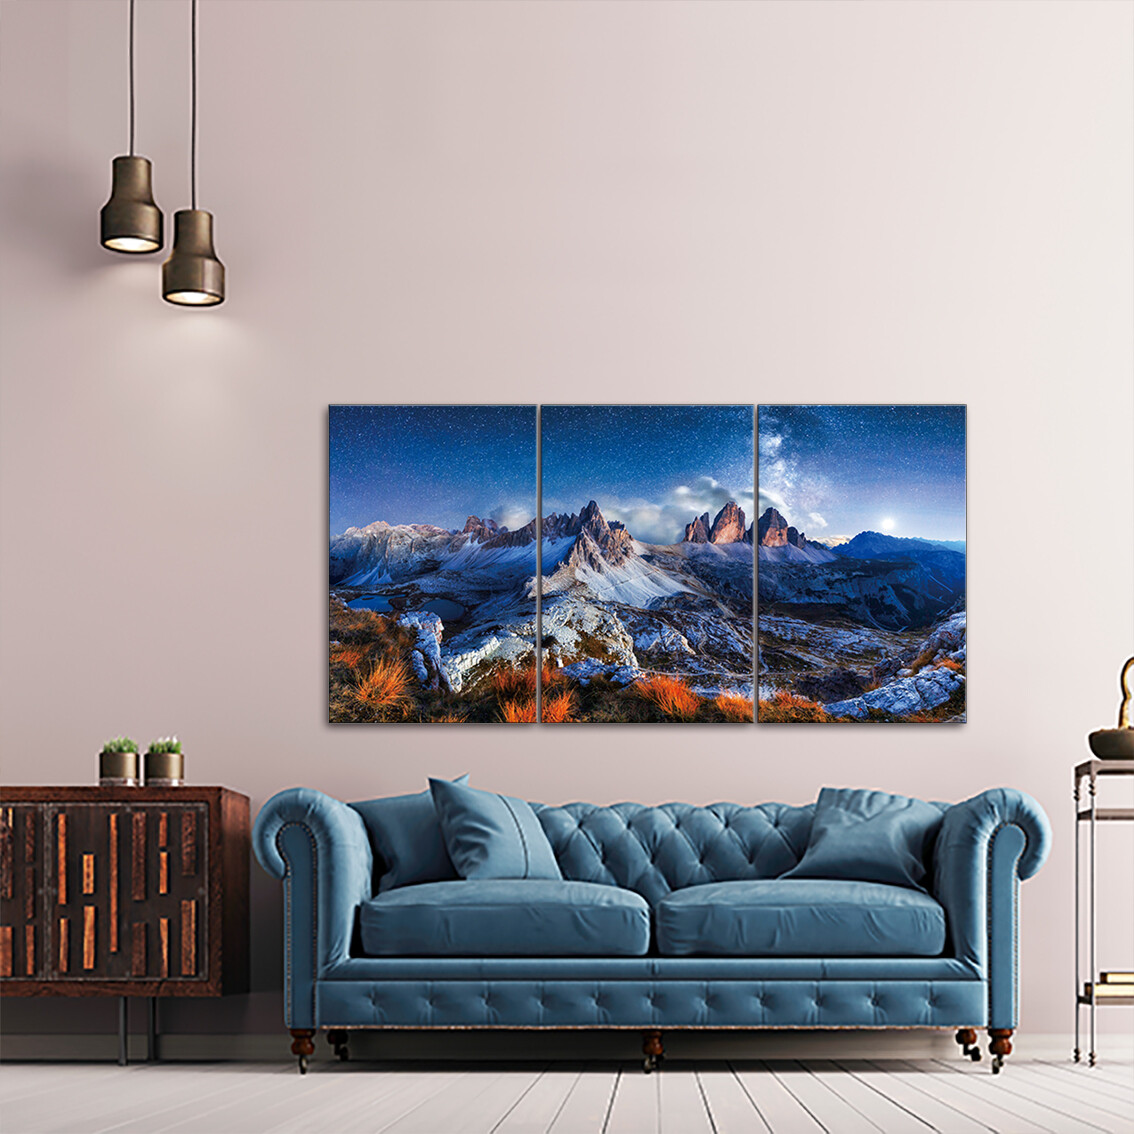 Swiss Alps (3 Panels Large) - Modern Luxury Wall art Printed on Acrylic Glass - Frameless and Ready to Hang